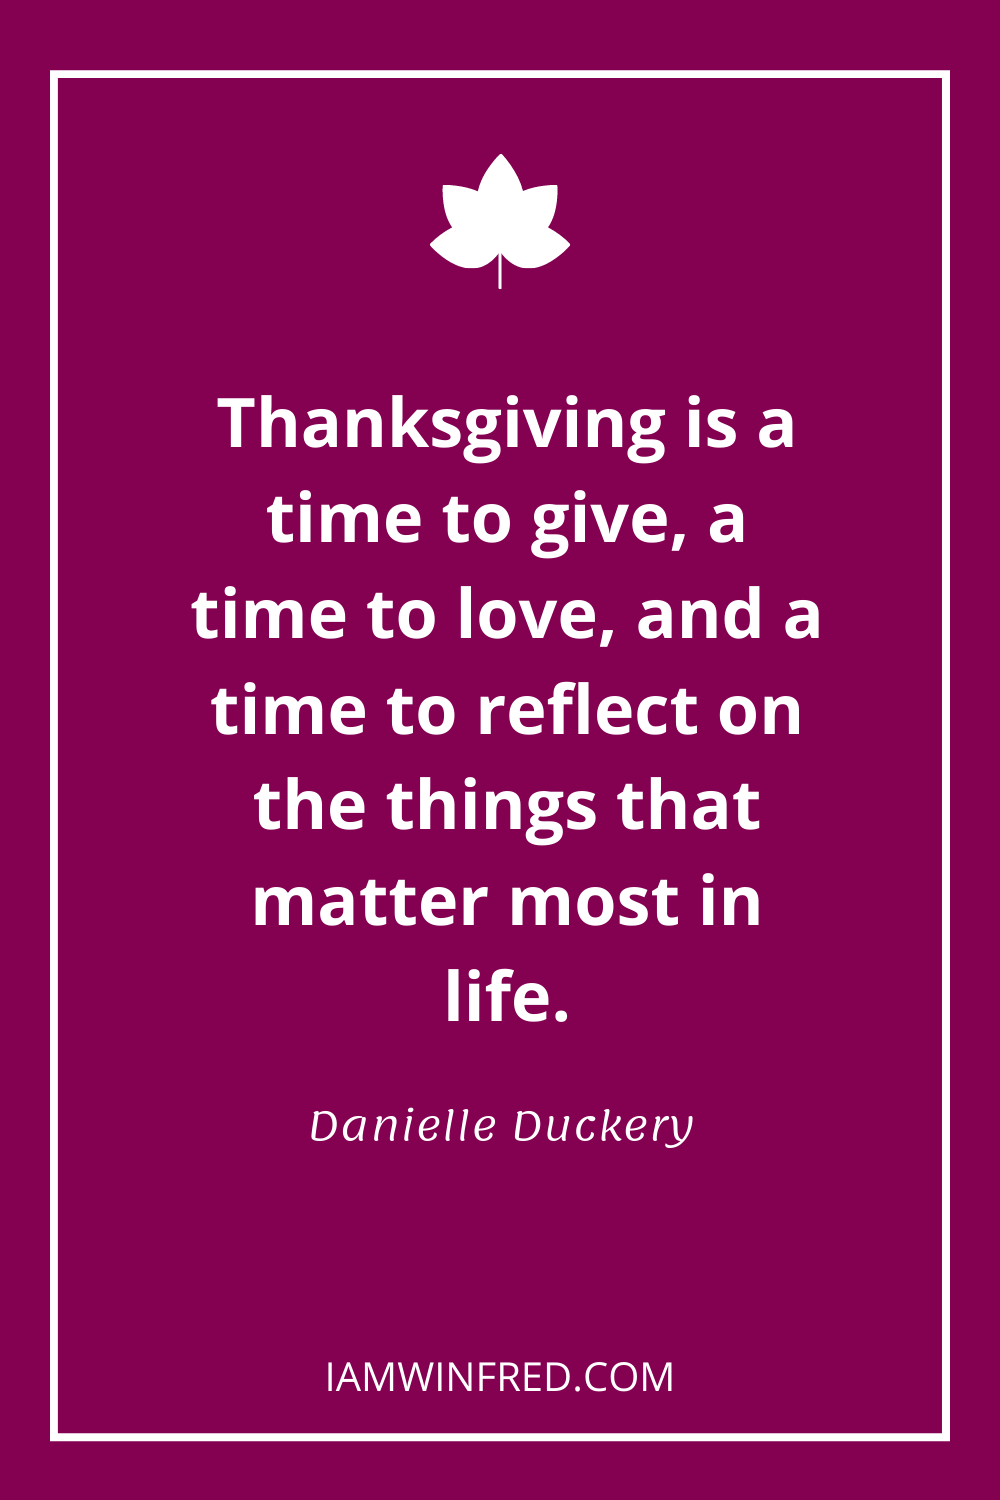 Thanksgiving Is A Time To Give A Time To Love And A Time To Reflect On The Things That Matter Most In Life.